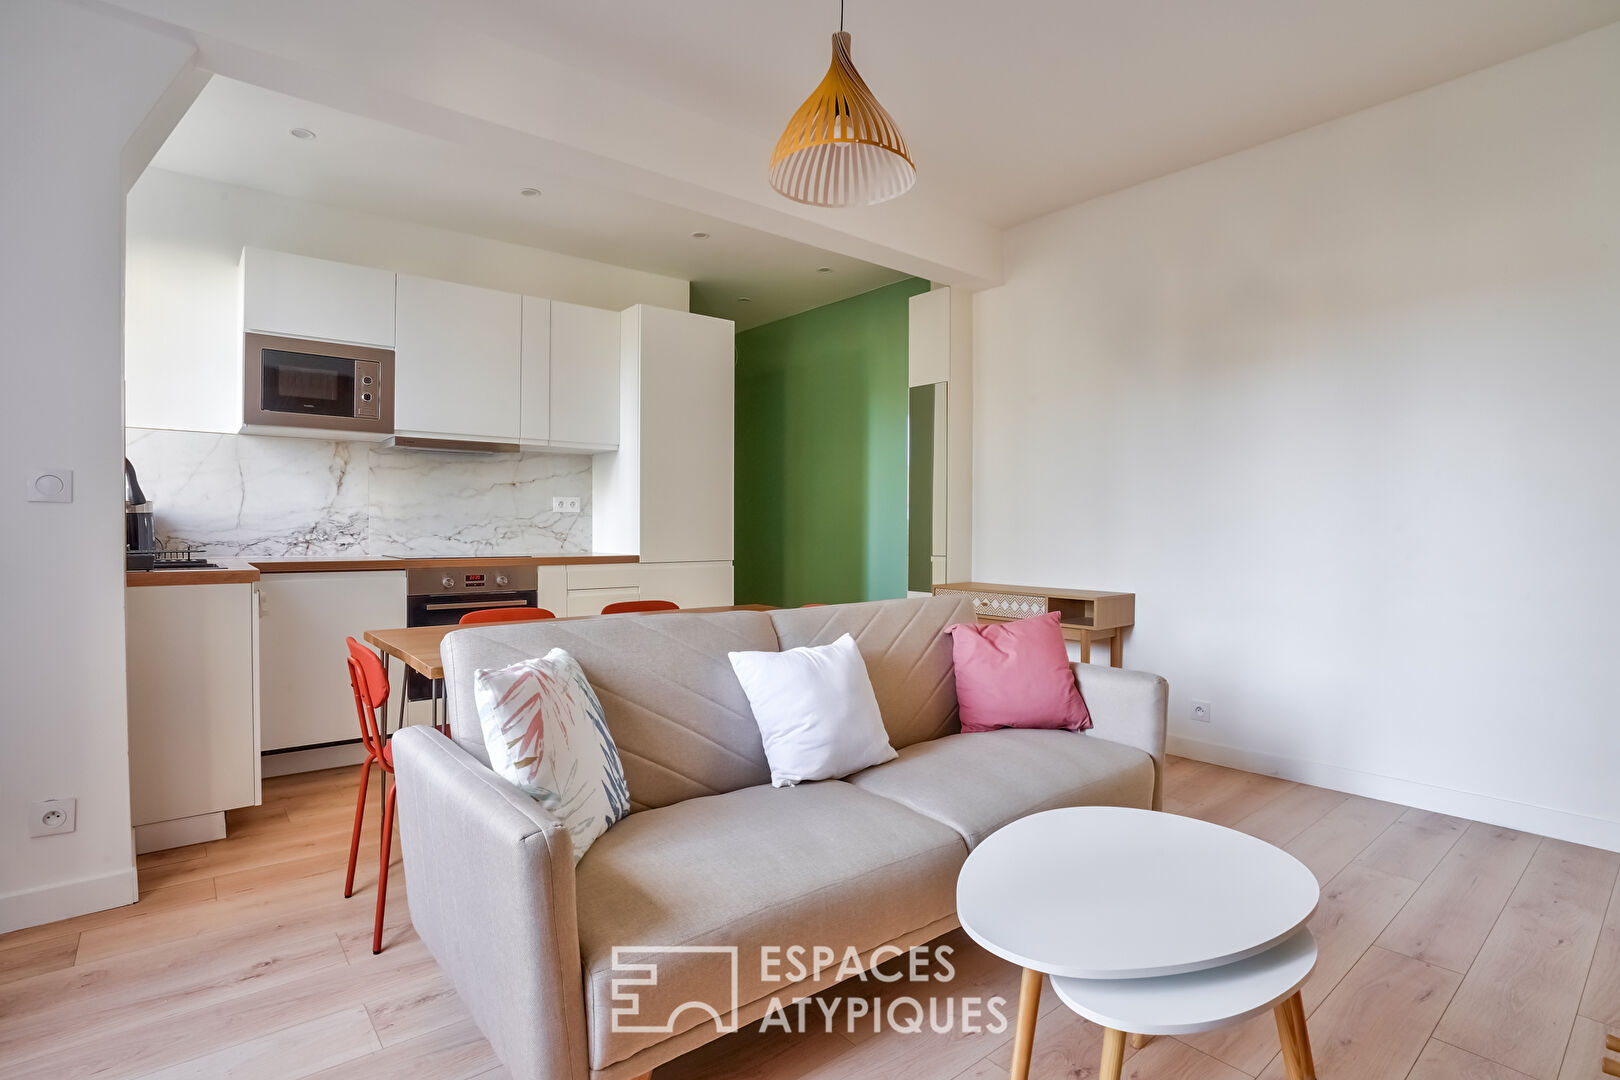 Revamped apartment, Courbevoie station area